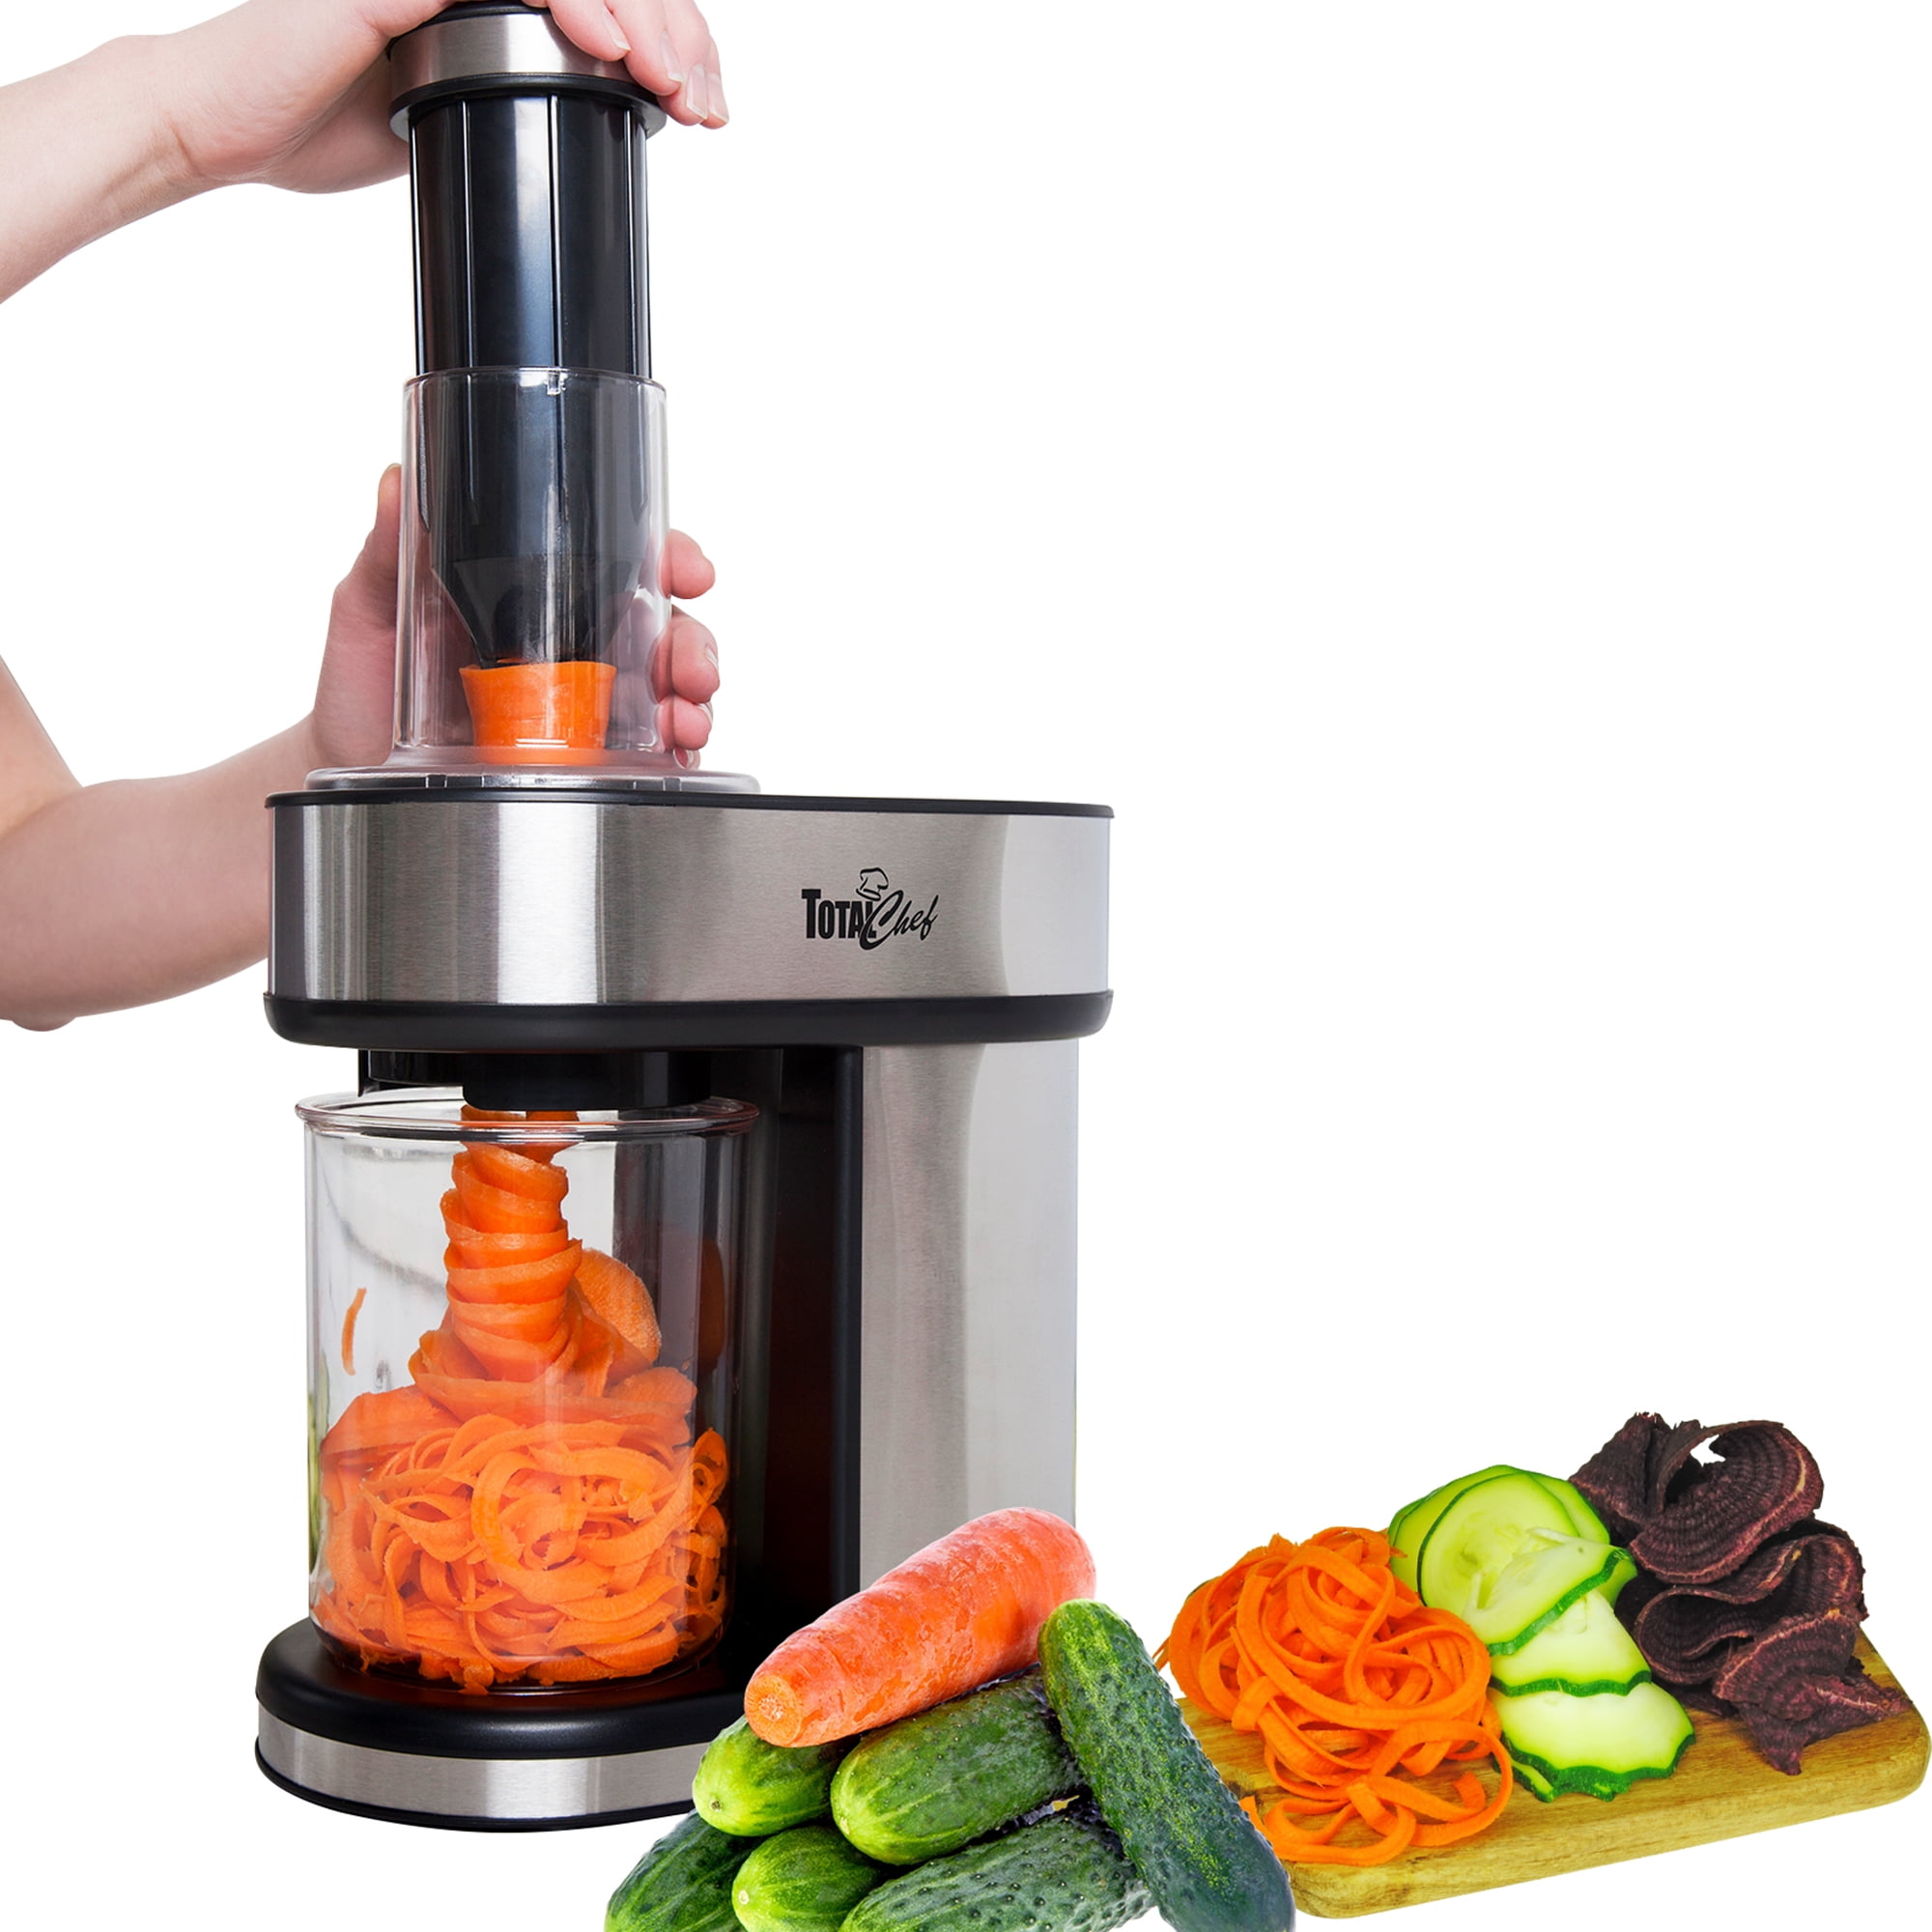  Electric Spiralizer with 3 Blades - Fast, Easy Spiral Vegetable  Slicer - Stainless Steel - Compact Storage - Fits Most Large Vegetables  Including Zucchini and Carrots - By PII: Home & Kitchen